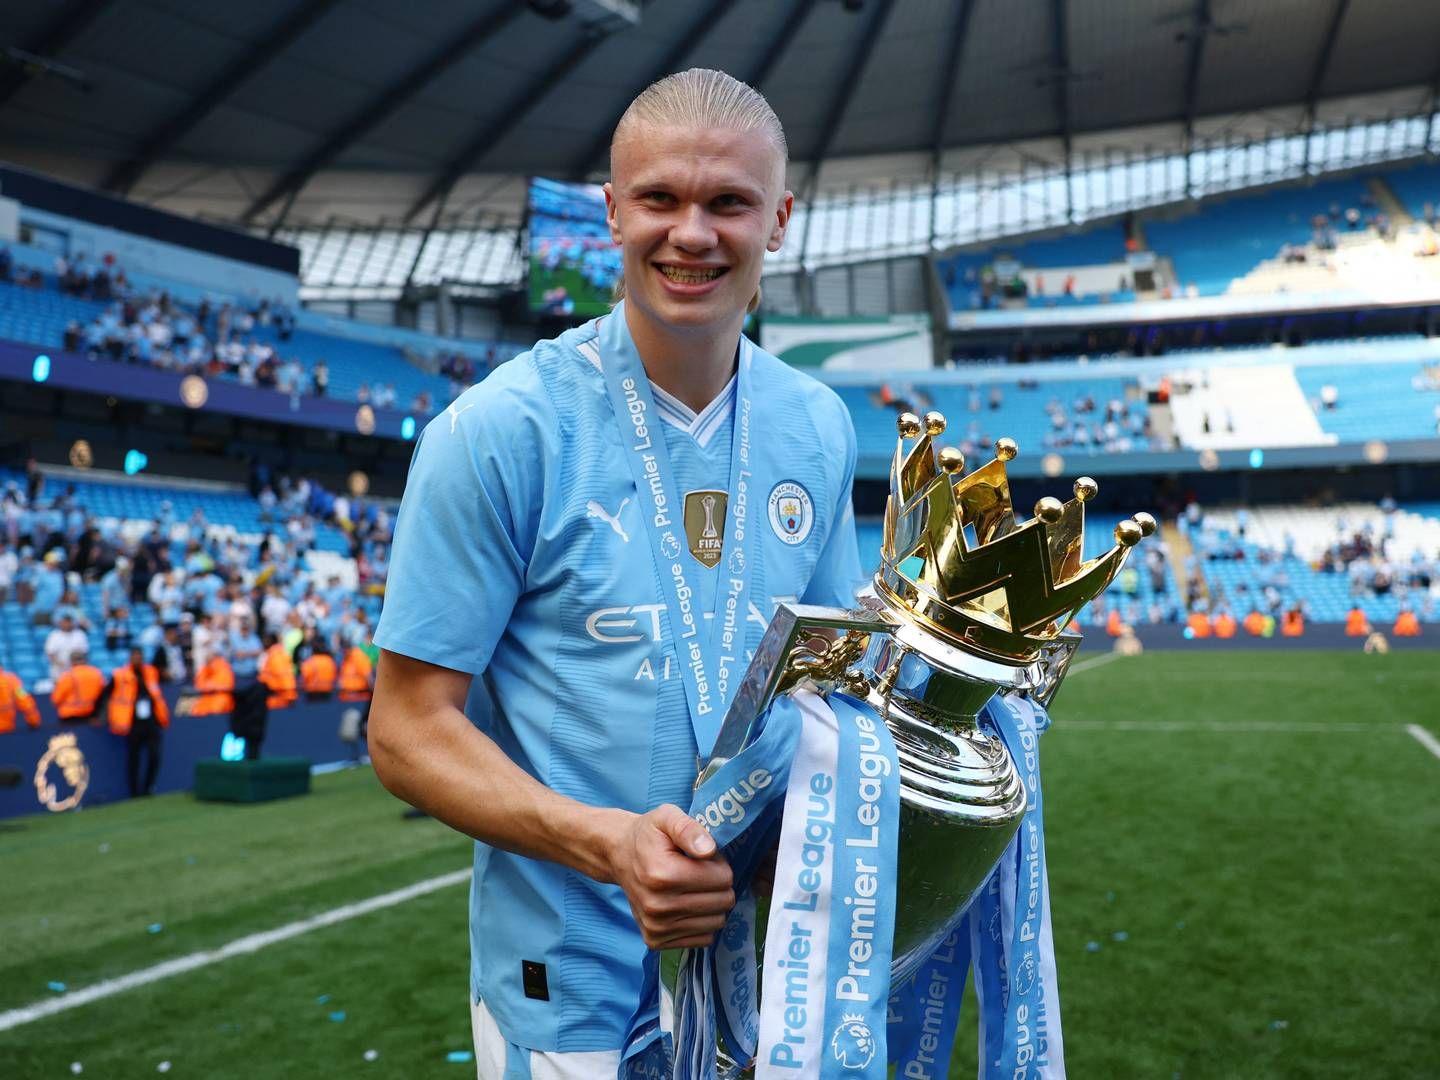 Erling Braut Haaland with the trophy after winning the Premier League on May 19. | Foto: Molly Darlington/Reuters/Ritzau Scanpix